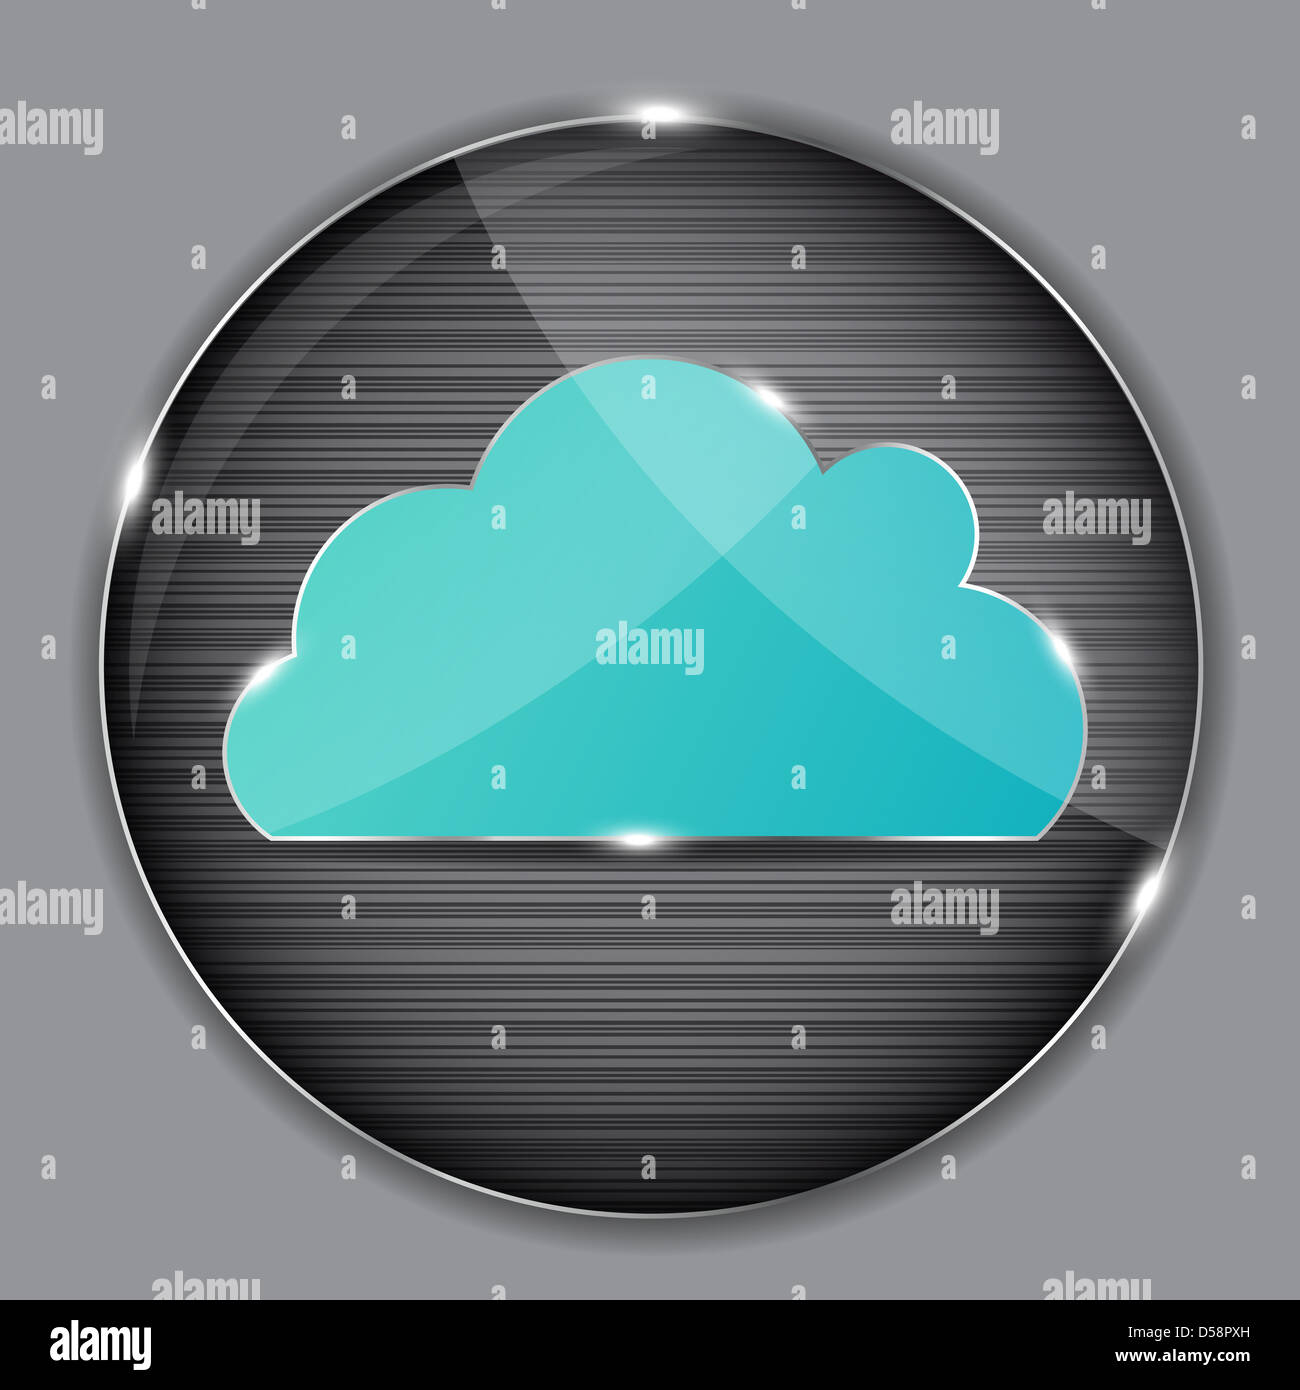 Vector glass button with cloud icon. Stock Photo